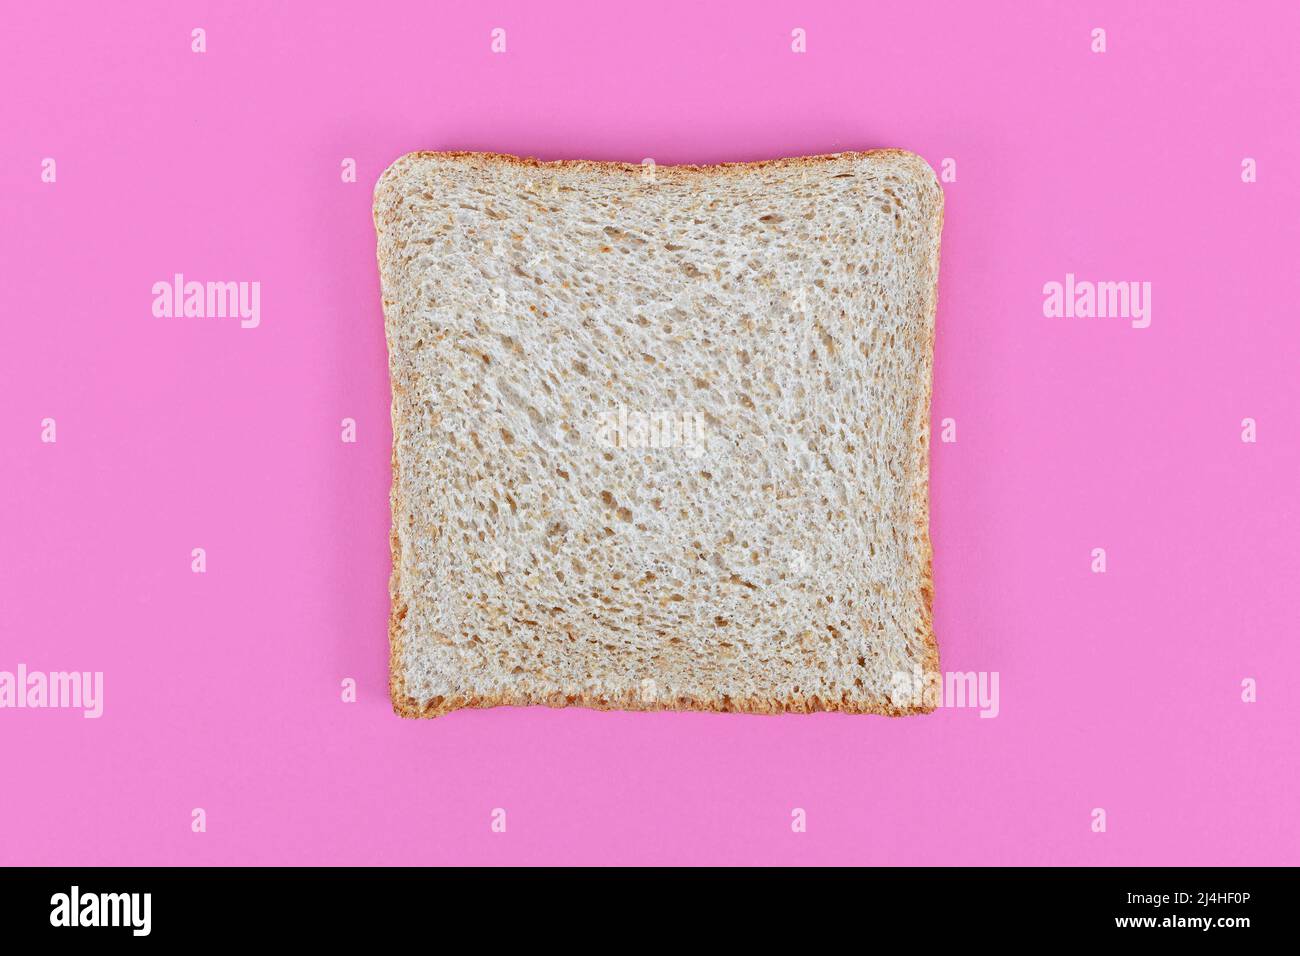 Slices of spelt wheat toast bread on pink background Stock Photo